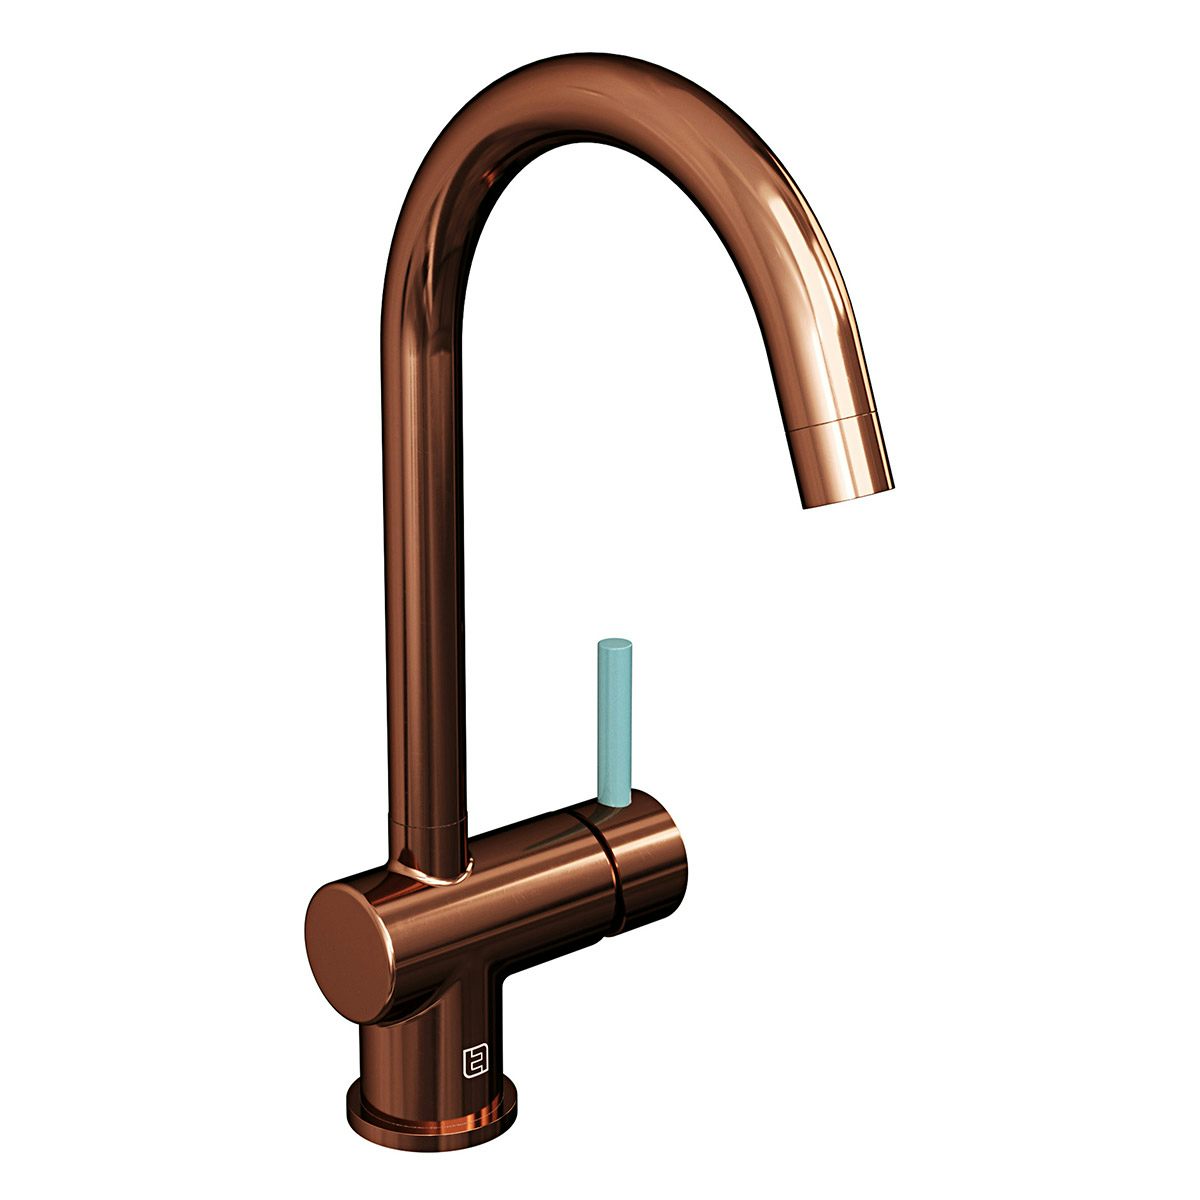 The Tap Factory Vibrance kitchen mixer tap with copper and pastel blue finish